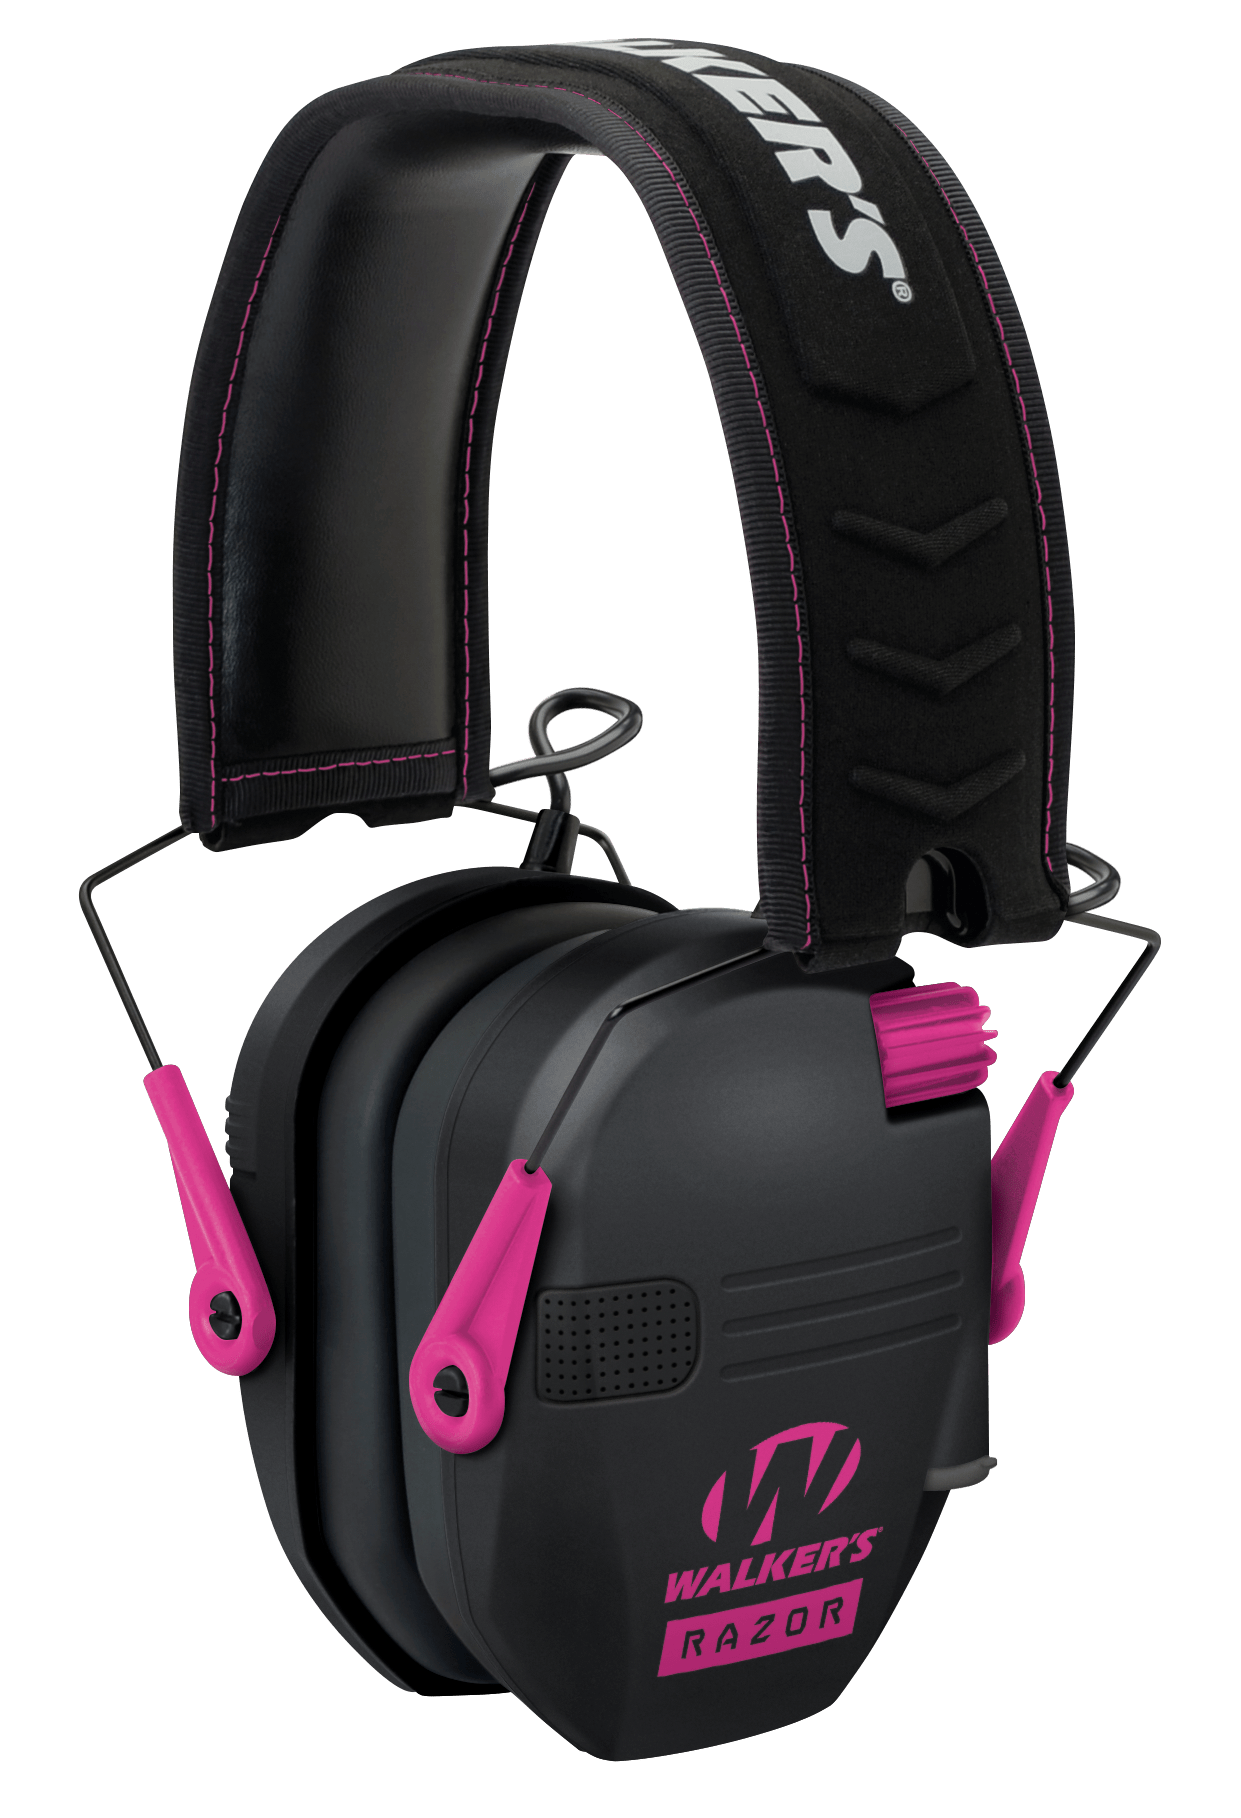 Walkers Walkers Muff Electronic Razor - Slim Tactical 23db Black/pink Hearing And Eye Protection